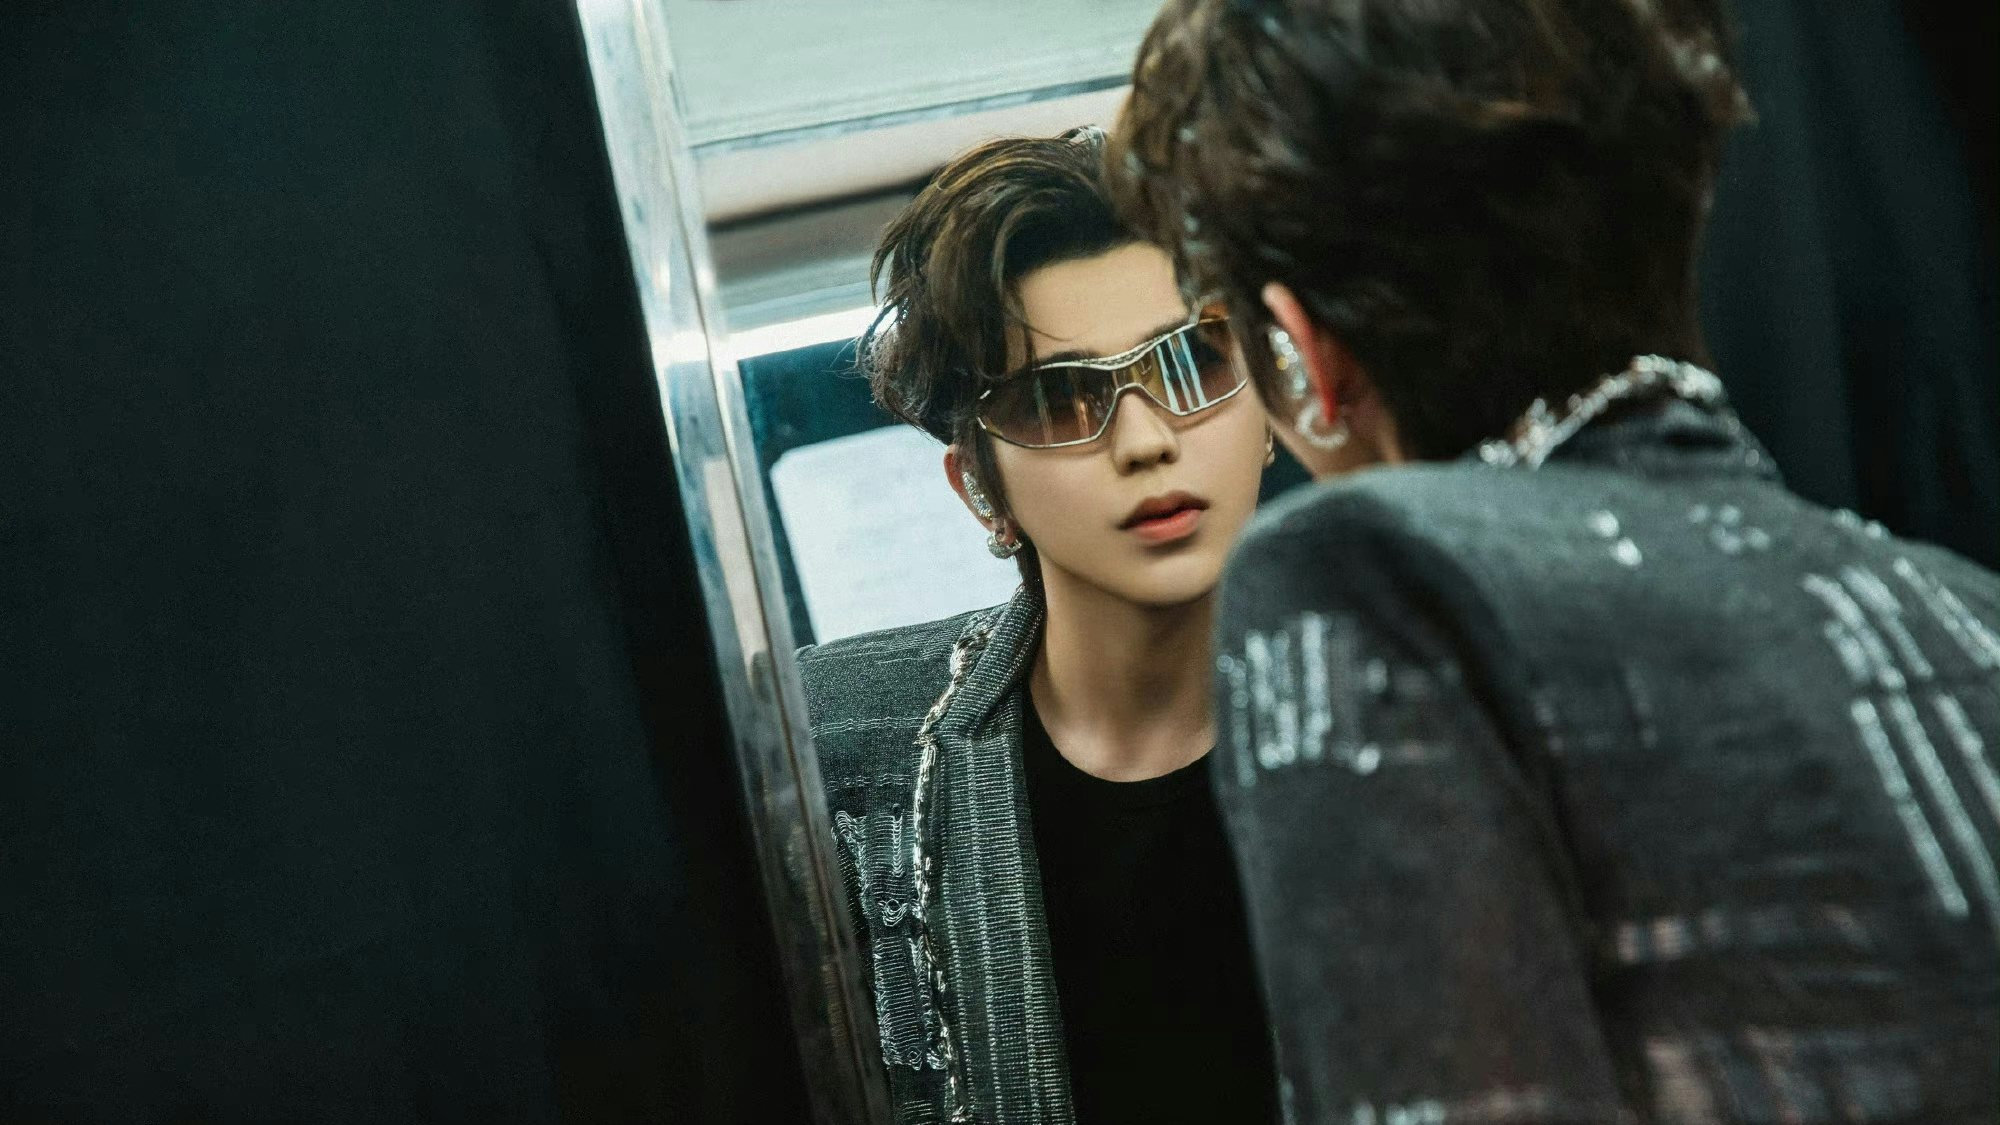 Notable incidents involving idols like Kris Wu and Cai Xukun have rocked China’s entertainment industry, shedding light on toxic masculinity and its consequences. Photo: Cai Xukun's Weibo